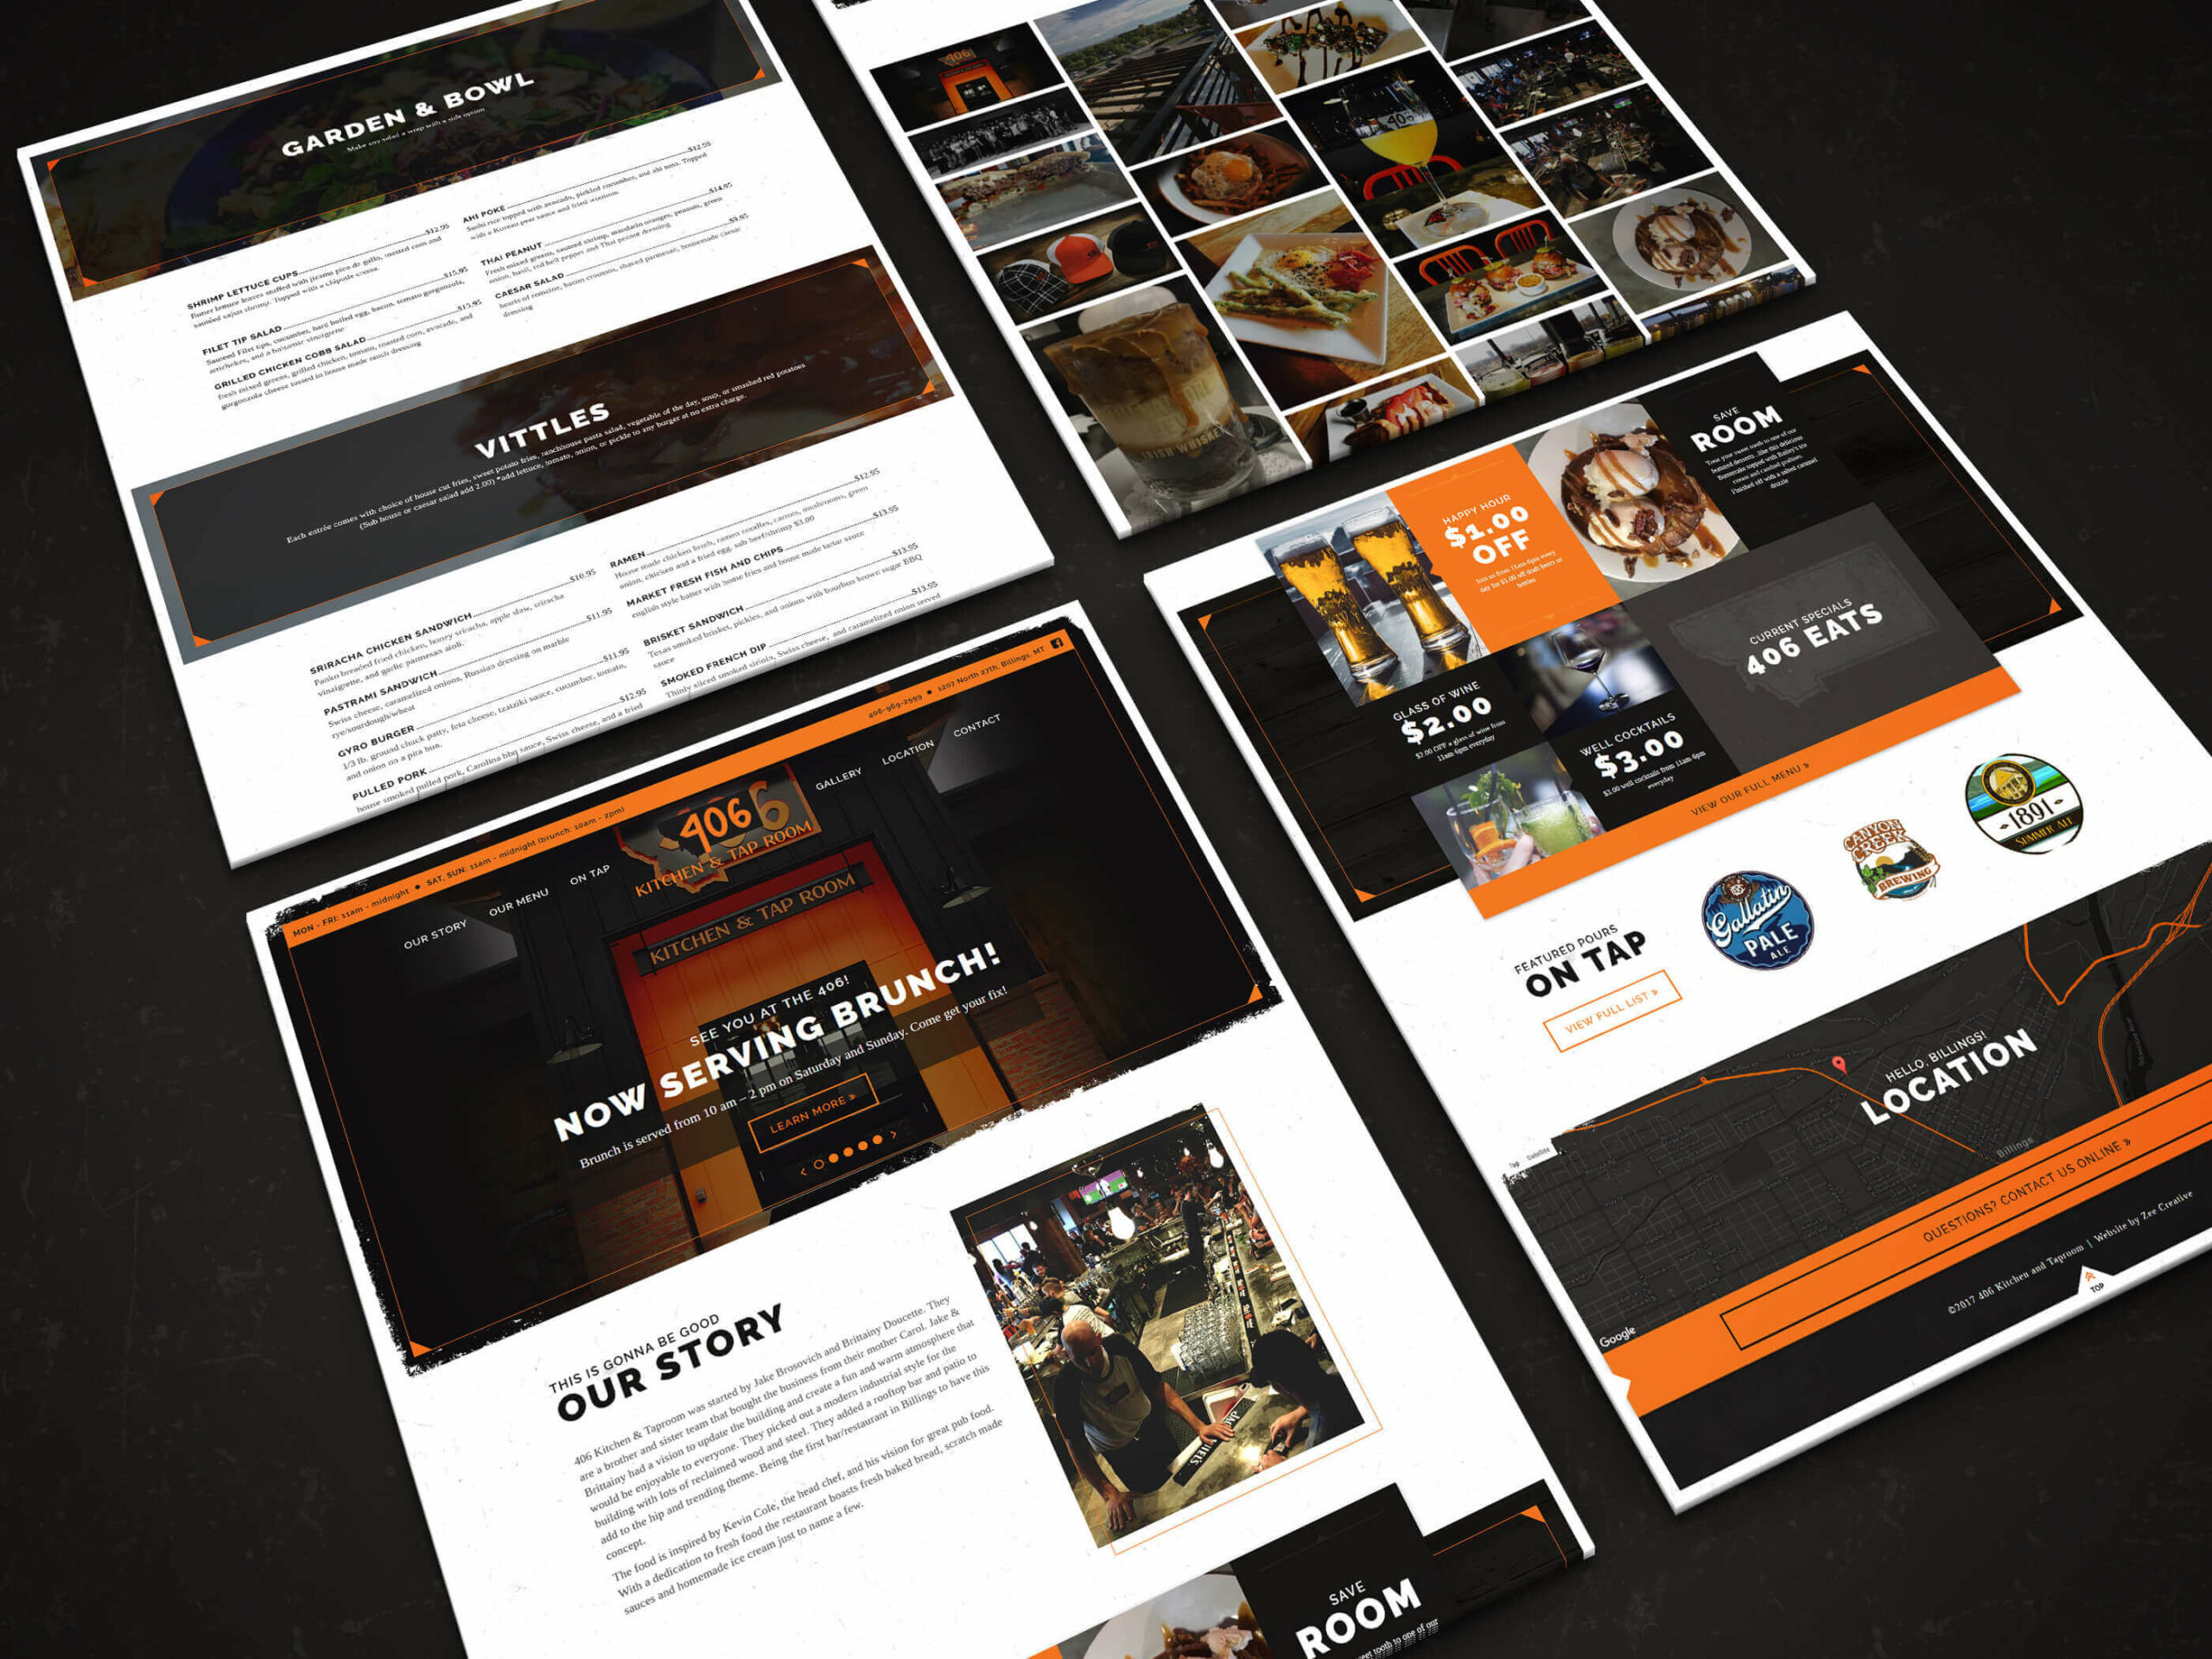 406 Kitchen and Tap Room web design